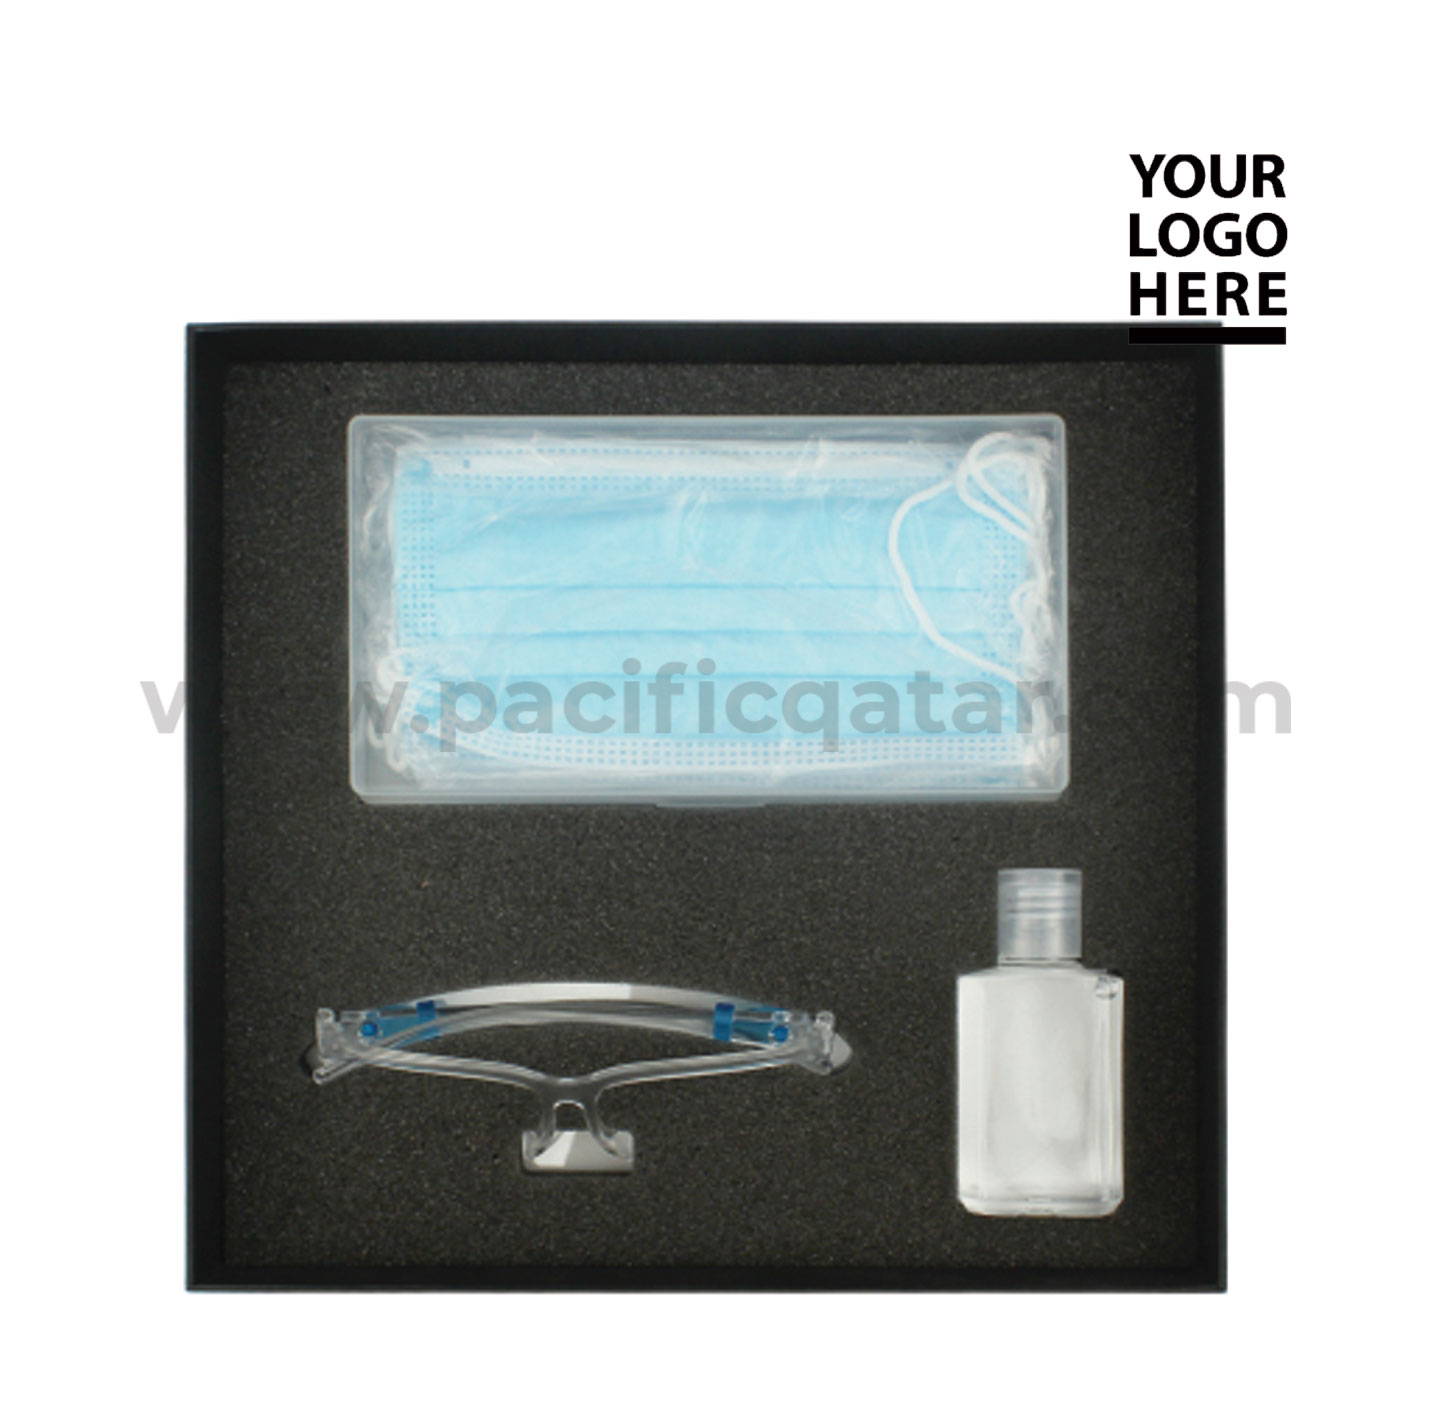 PPE Product Gift Set